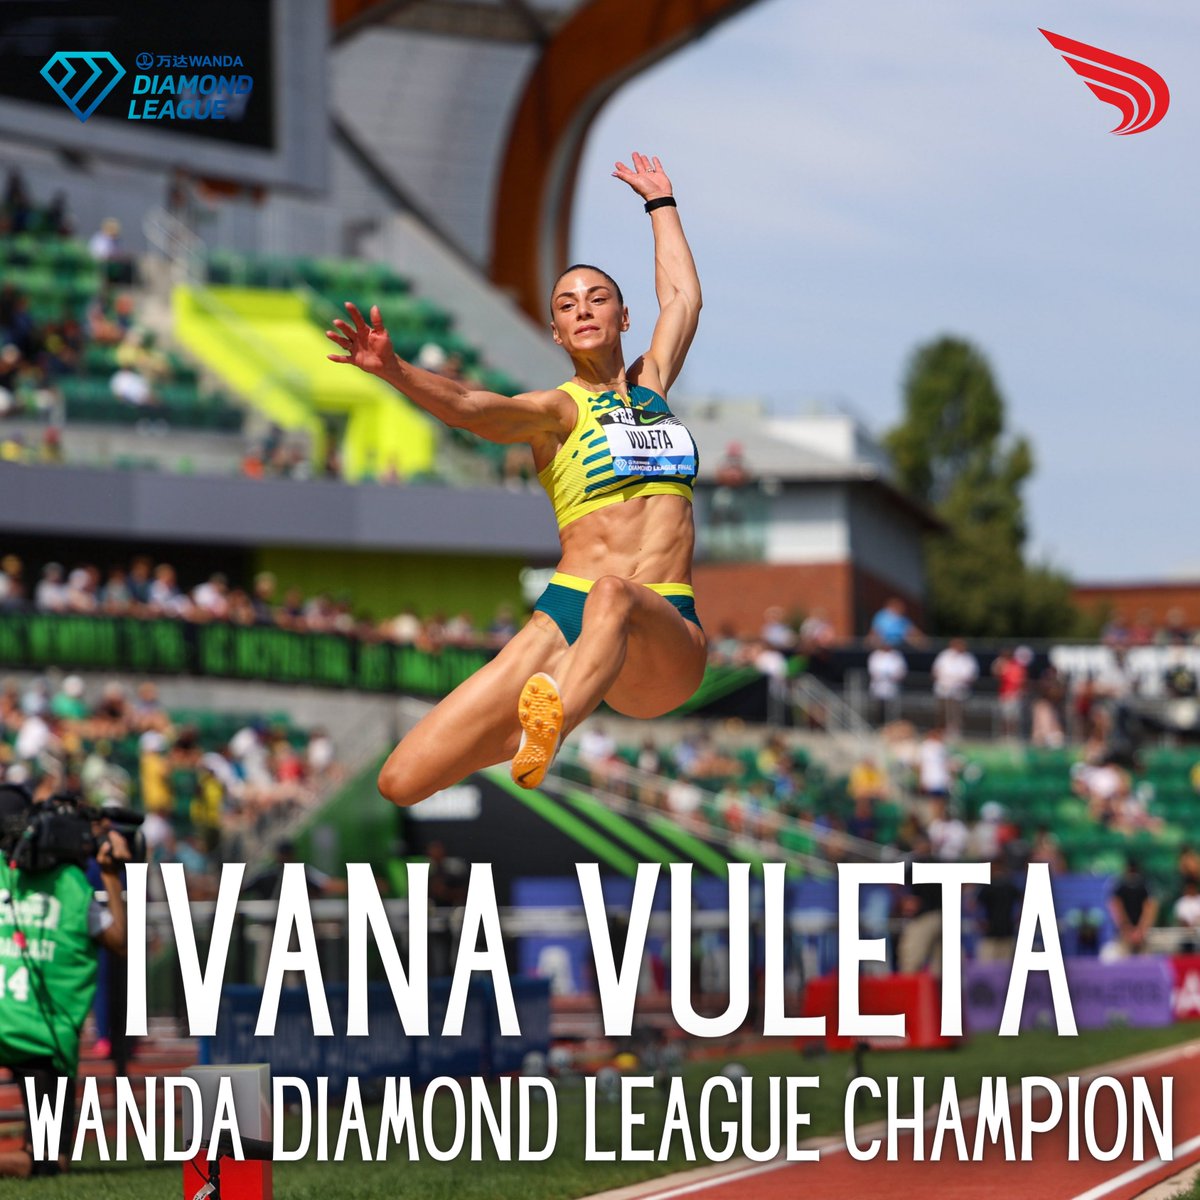 All she does is win🤷‍♀️🇷🇸 Serbia's Ivana Vuleta hits 6.85 meters on her final jump to take home the women's Diamond League long jump title! #EugeneDL #PrefontaineClassic 📸: @GorczynskaMarta for Wanda Diamond League